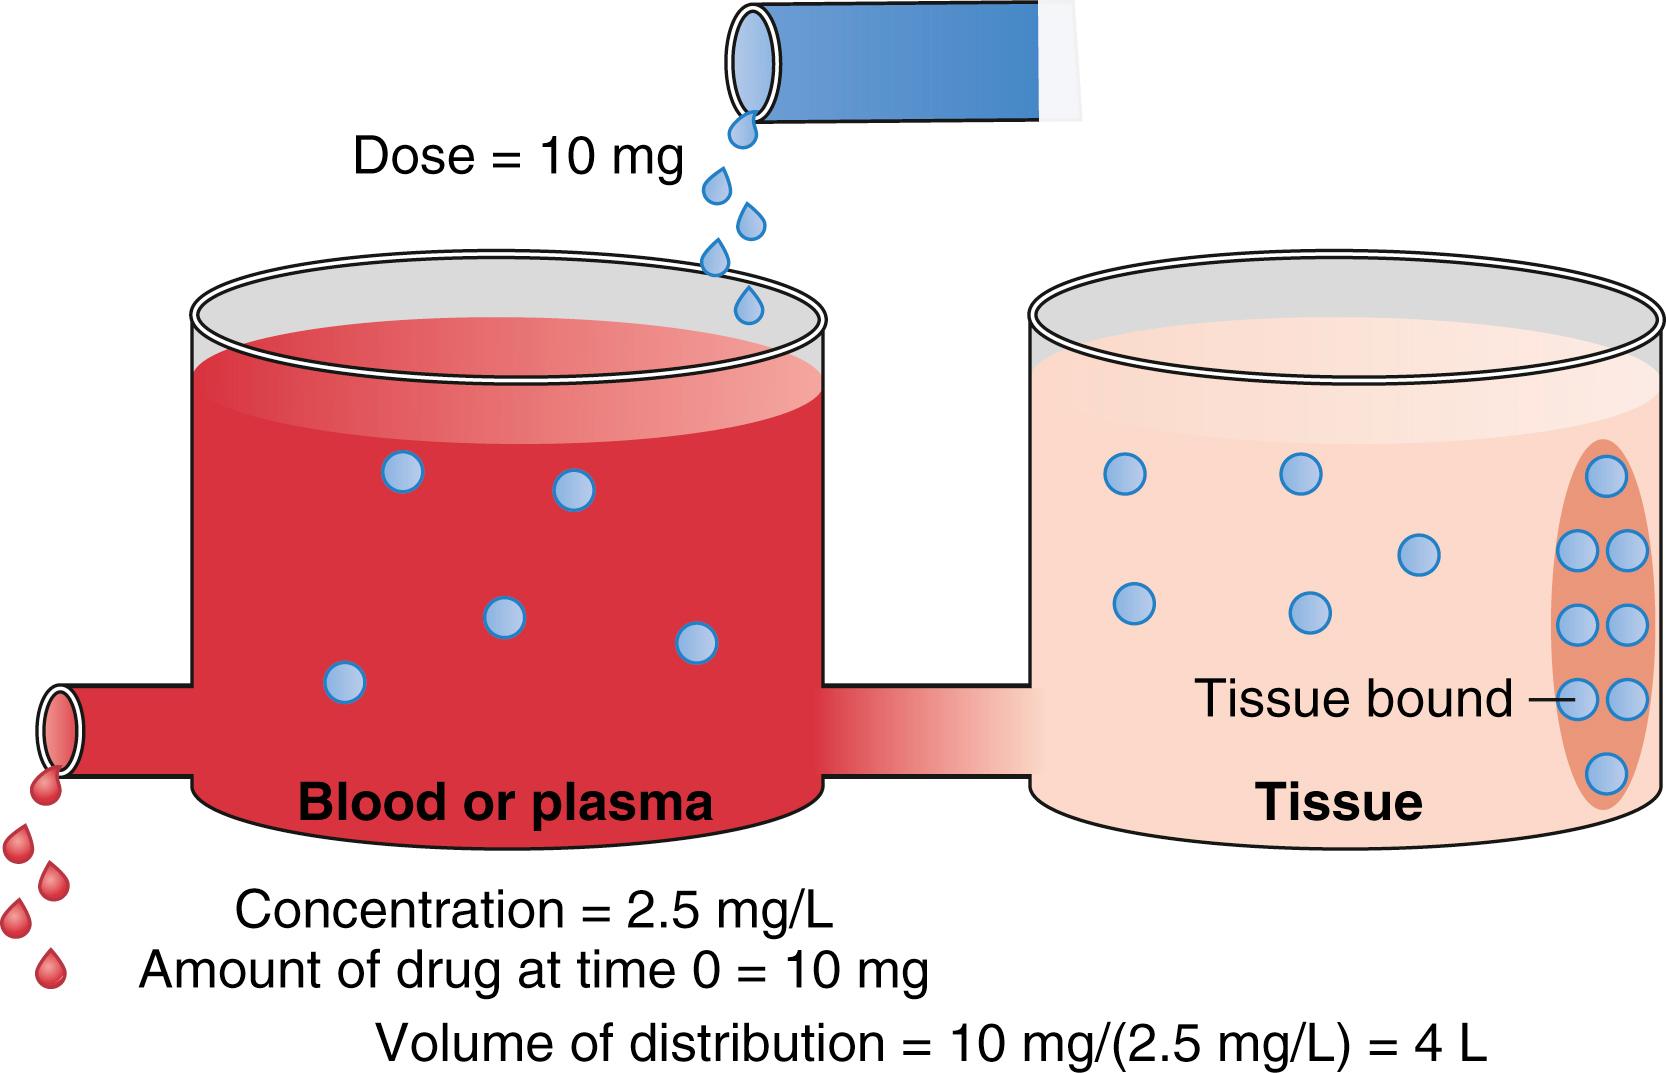 Fig. 18.4, Schematic of a two-tank model. The total volume of distribution consists of the sum of the two tanks. The brown ellipse in the peripheral volume represents tissue that binds up drugs. The measured concentration in the blood or plasma is 2.5 mg/mL just after a bolus dose of 10 mg. Using Fig. 18.1 , this leads to a distribution volume of 4 L.